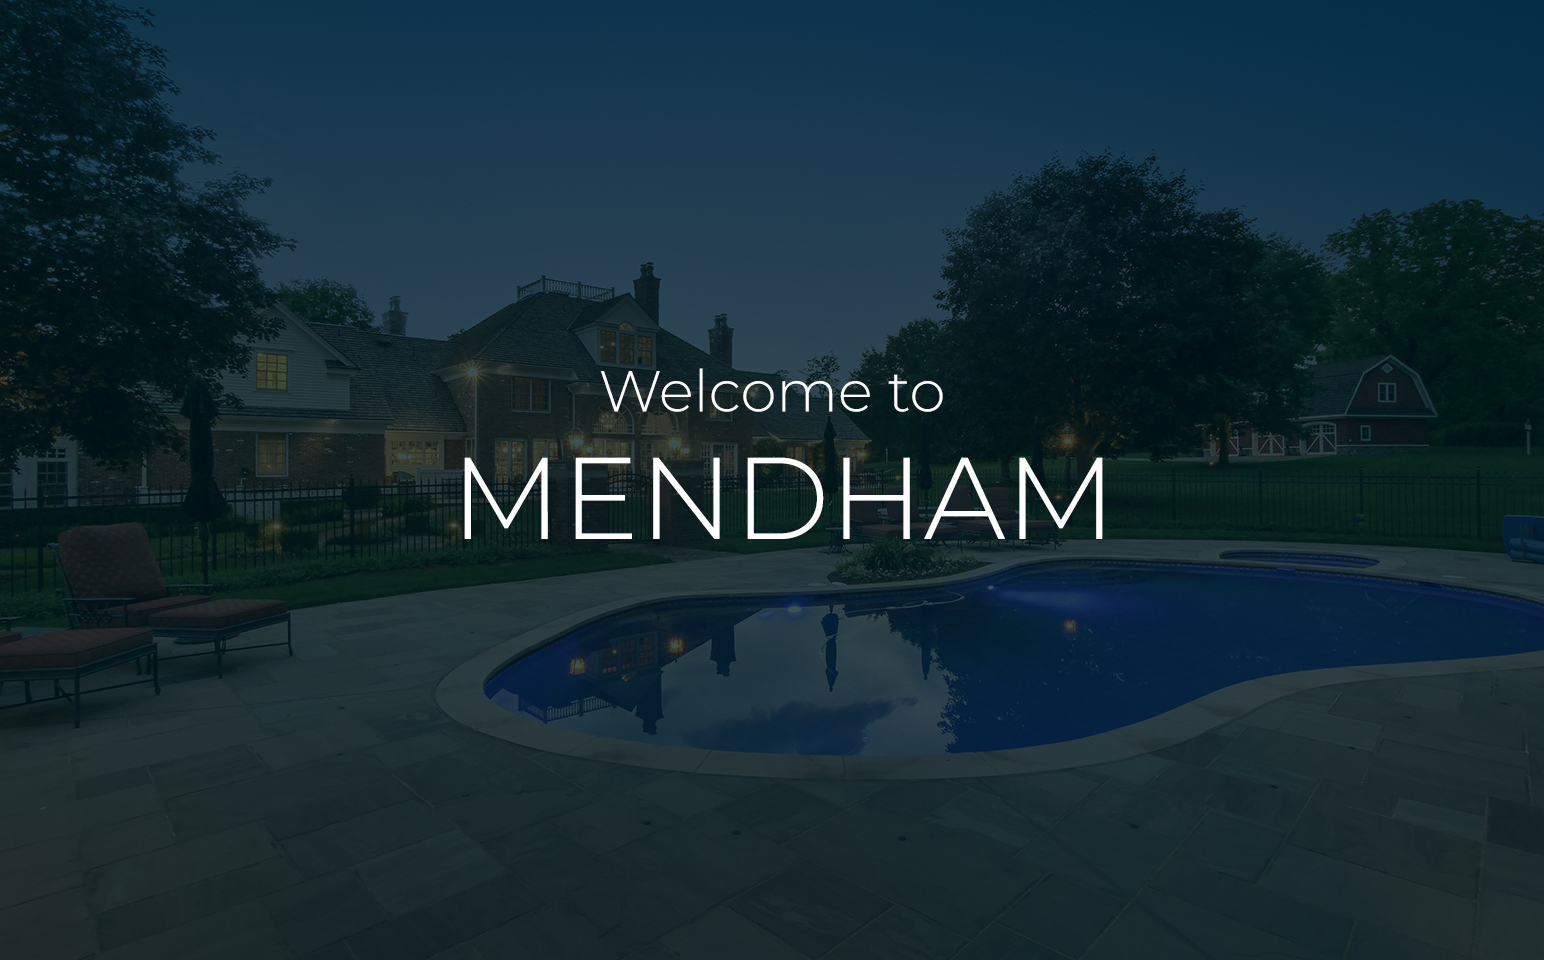 about Mendham